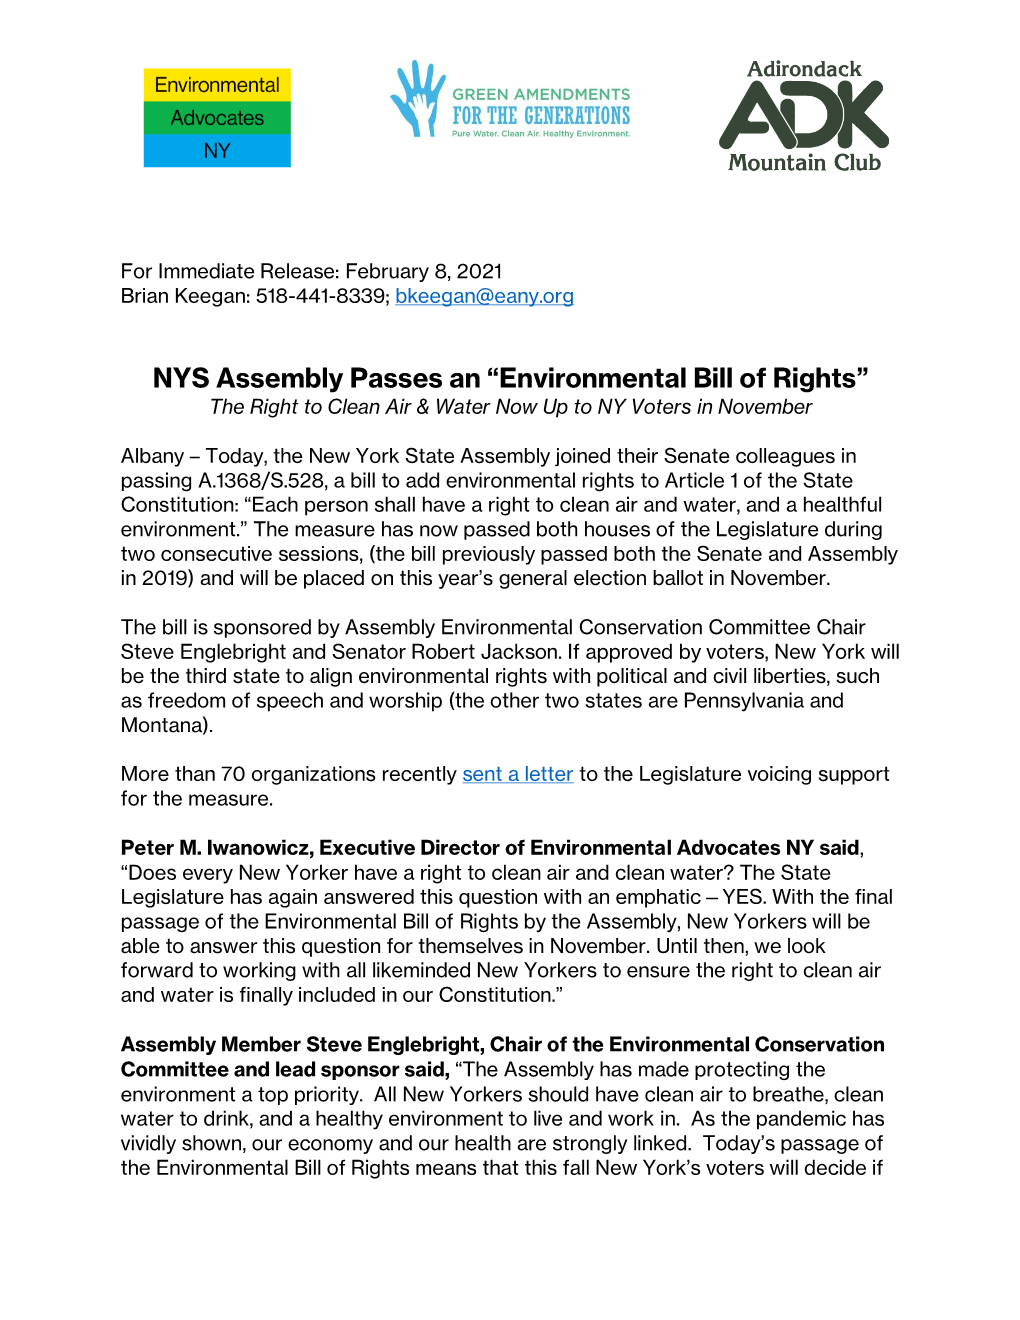 NYS Assembly Passes an “Environmental Bill of Rights” the Right to Clean Air & Water Now up to NY Voters in November